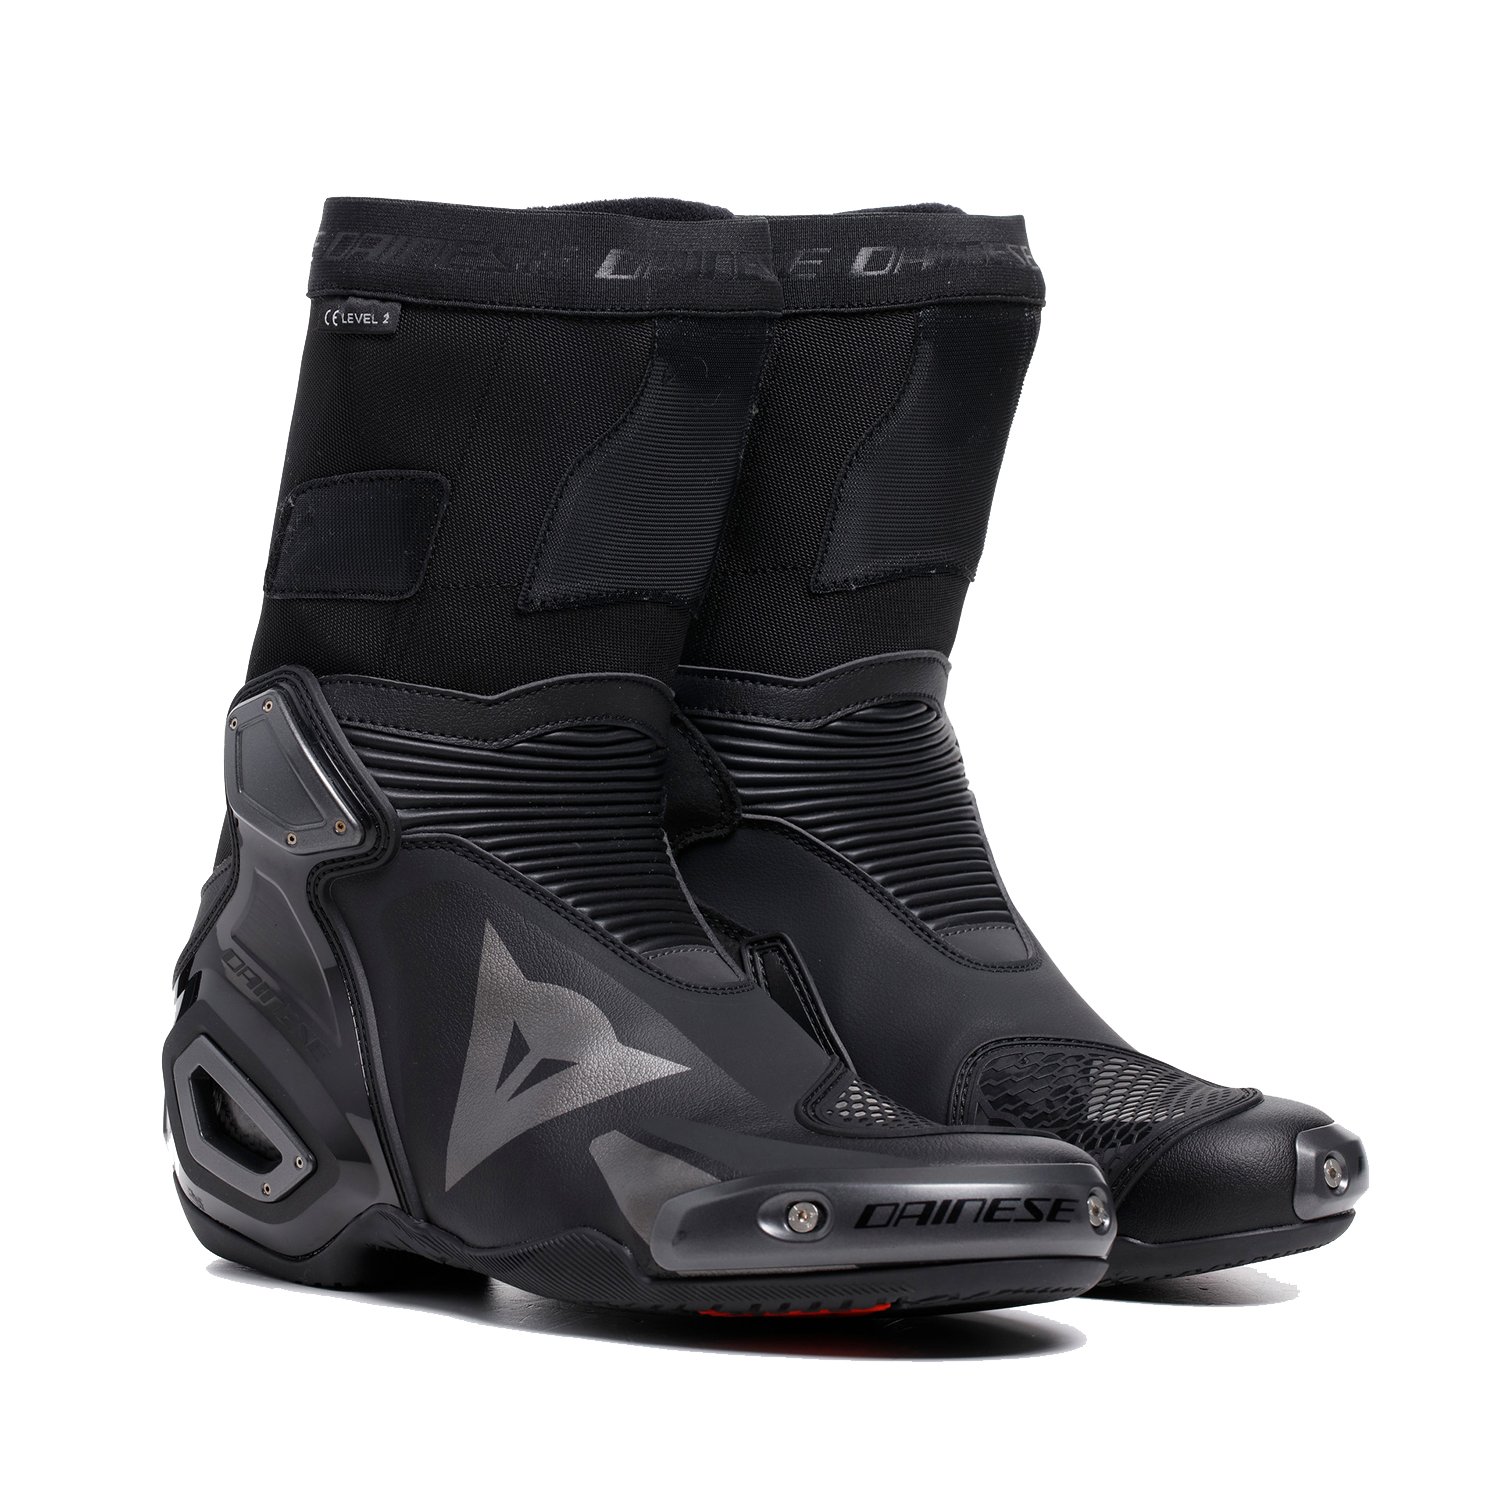 Image of Dainese Axial 2 Boots Black Black Größe 41